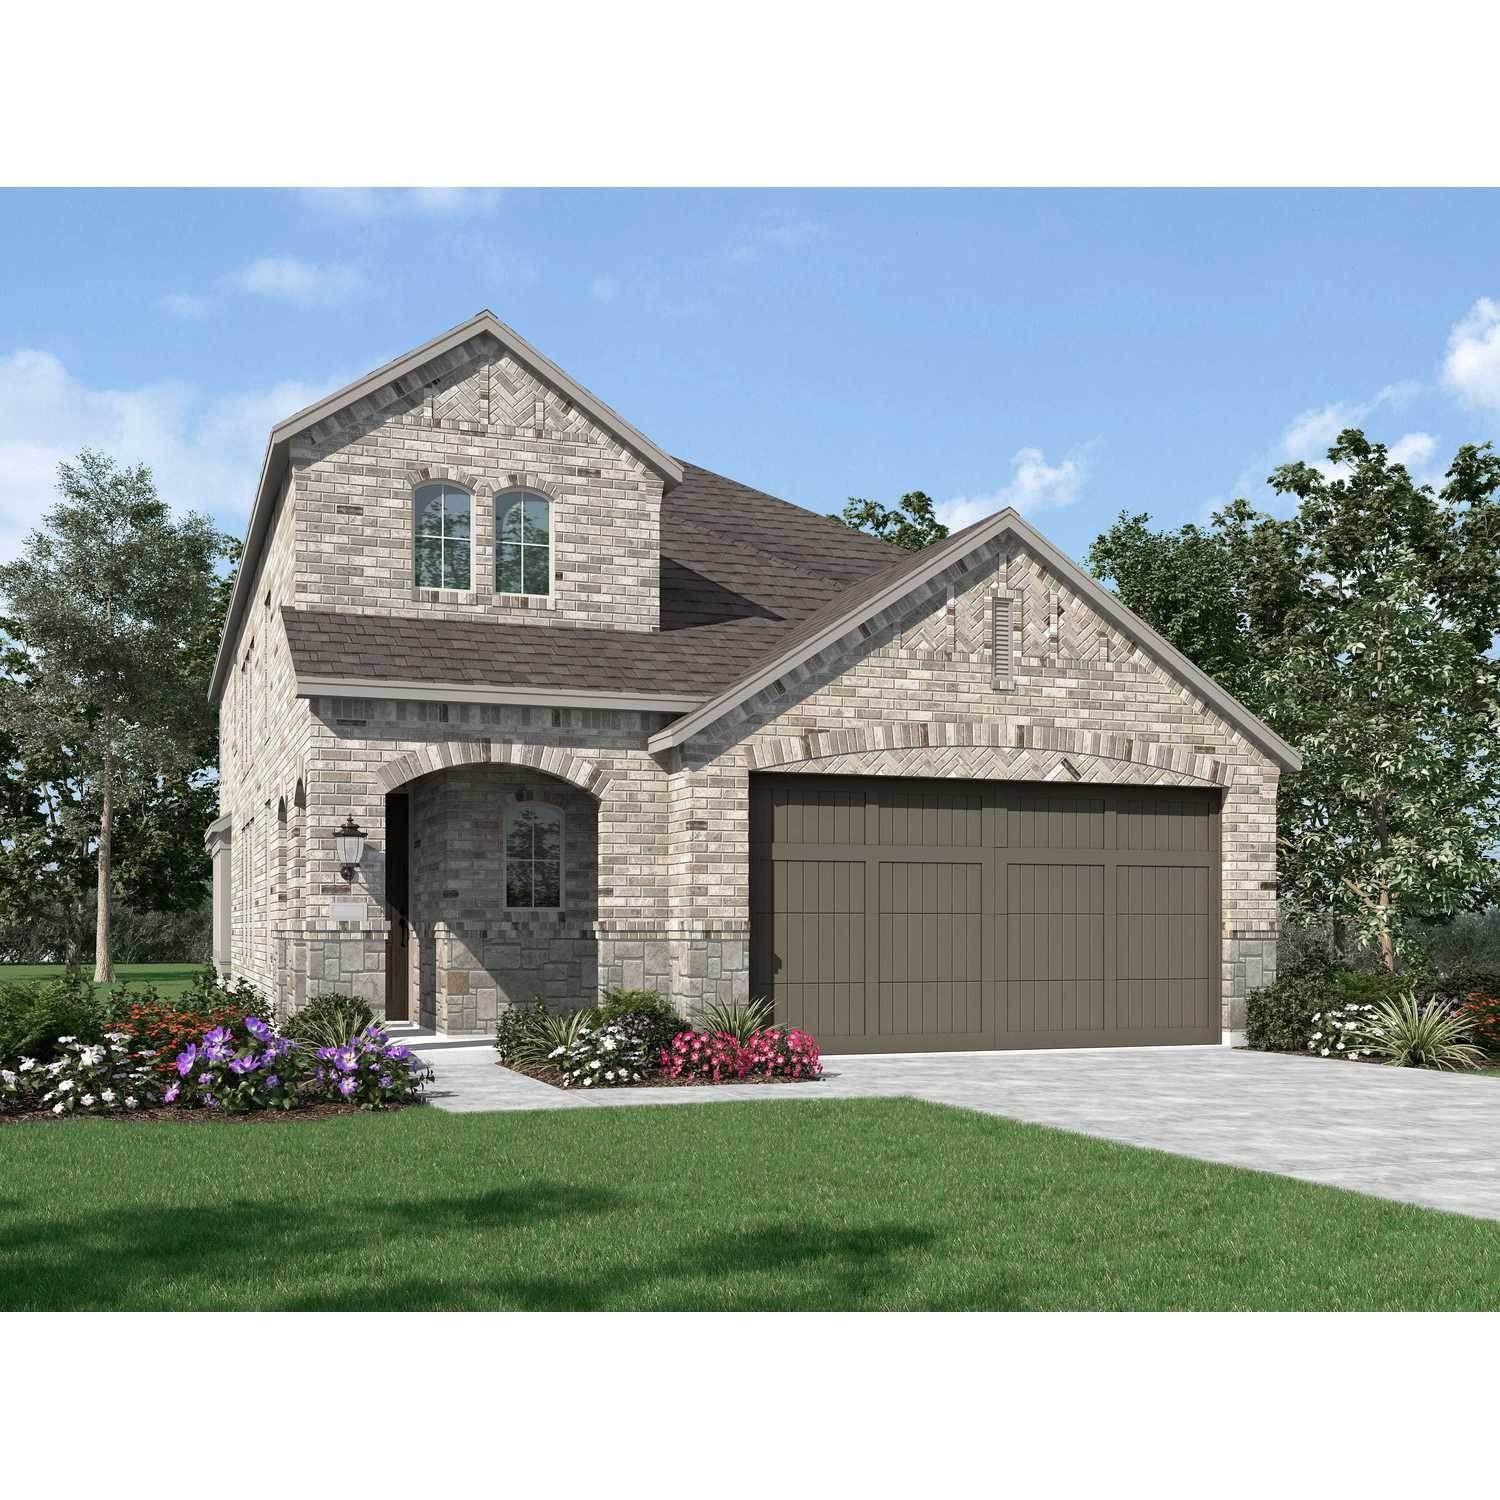 Single Family for Sale at New Braunfels, TX 78132